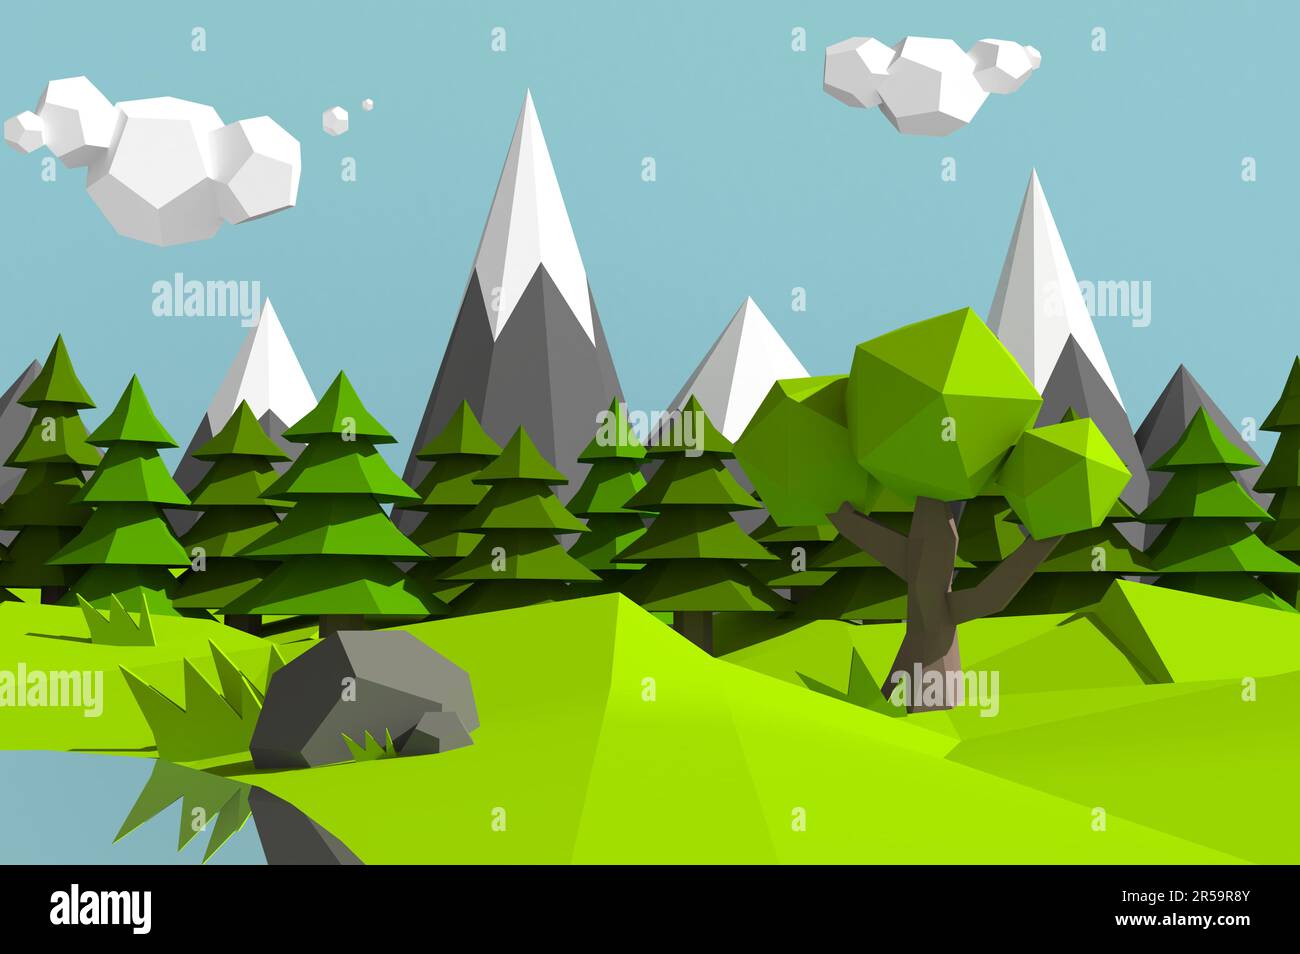 Low poly mountains landscape Stock Photo